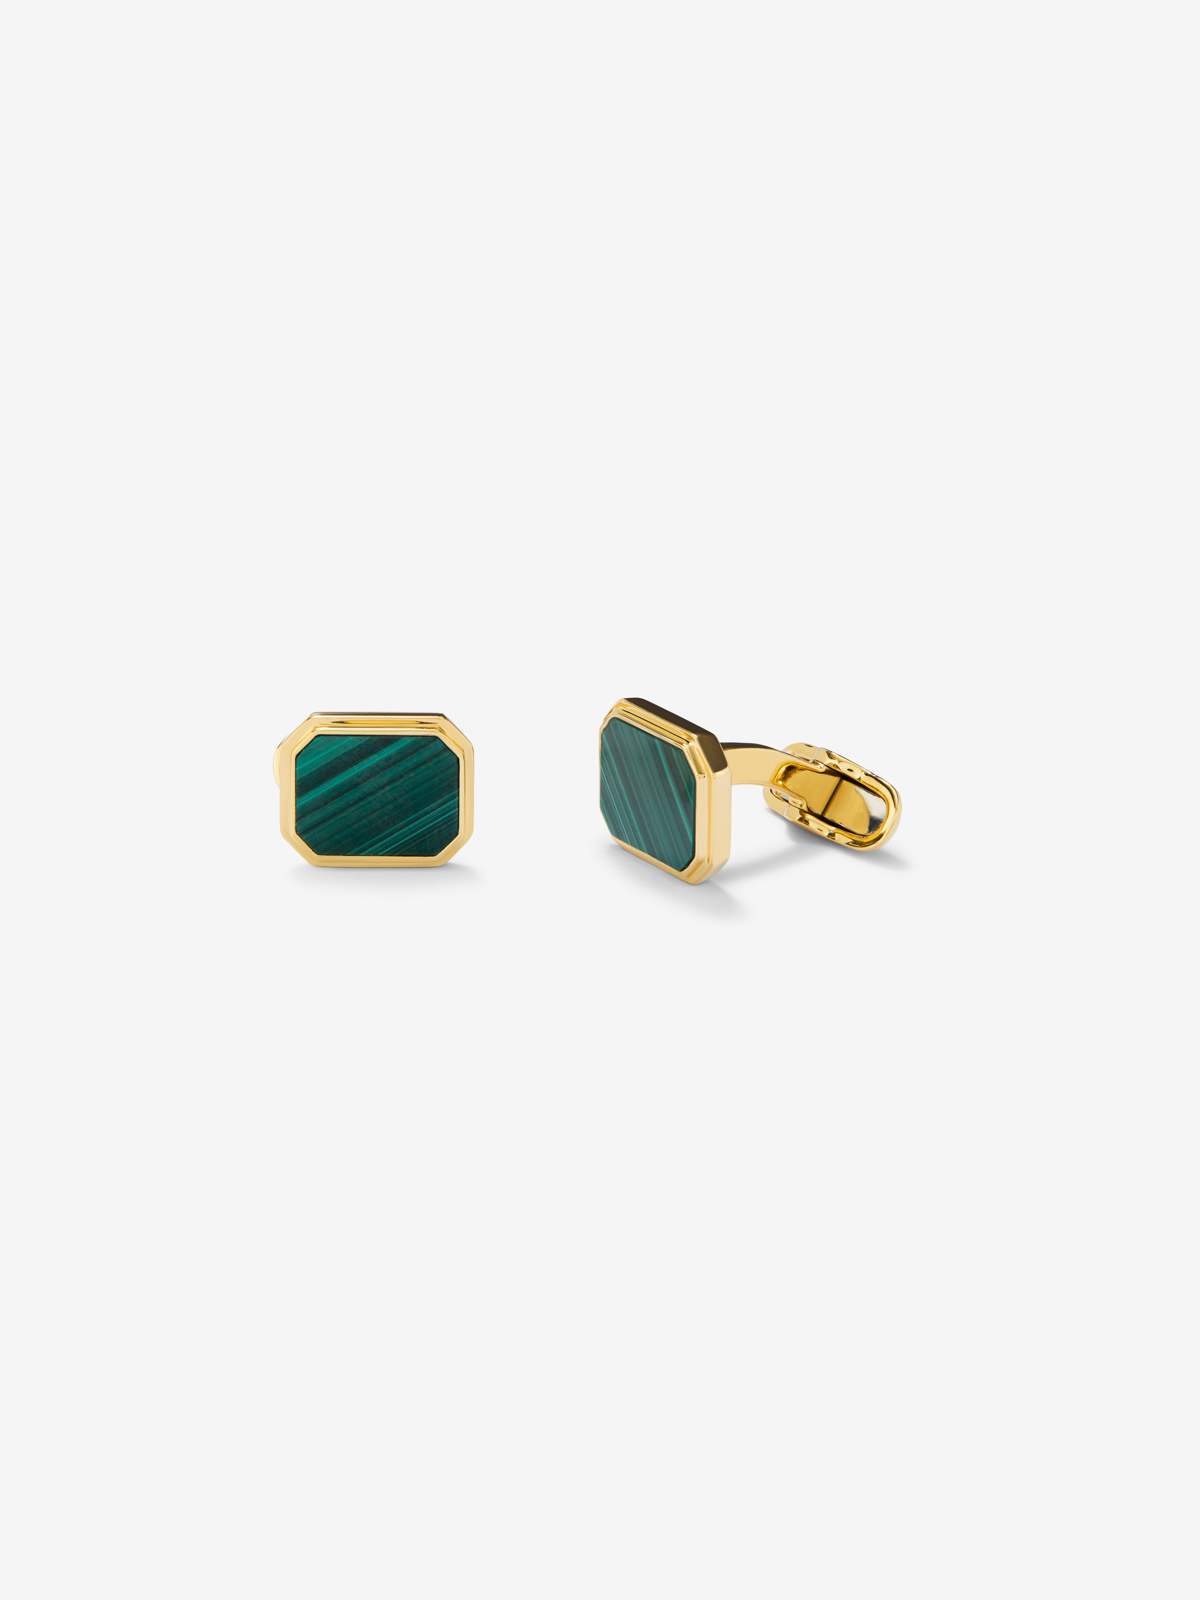 18k yellow gold twins with 6.7 cts green malaquita